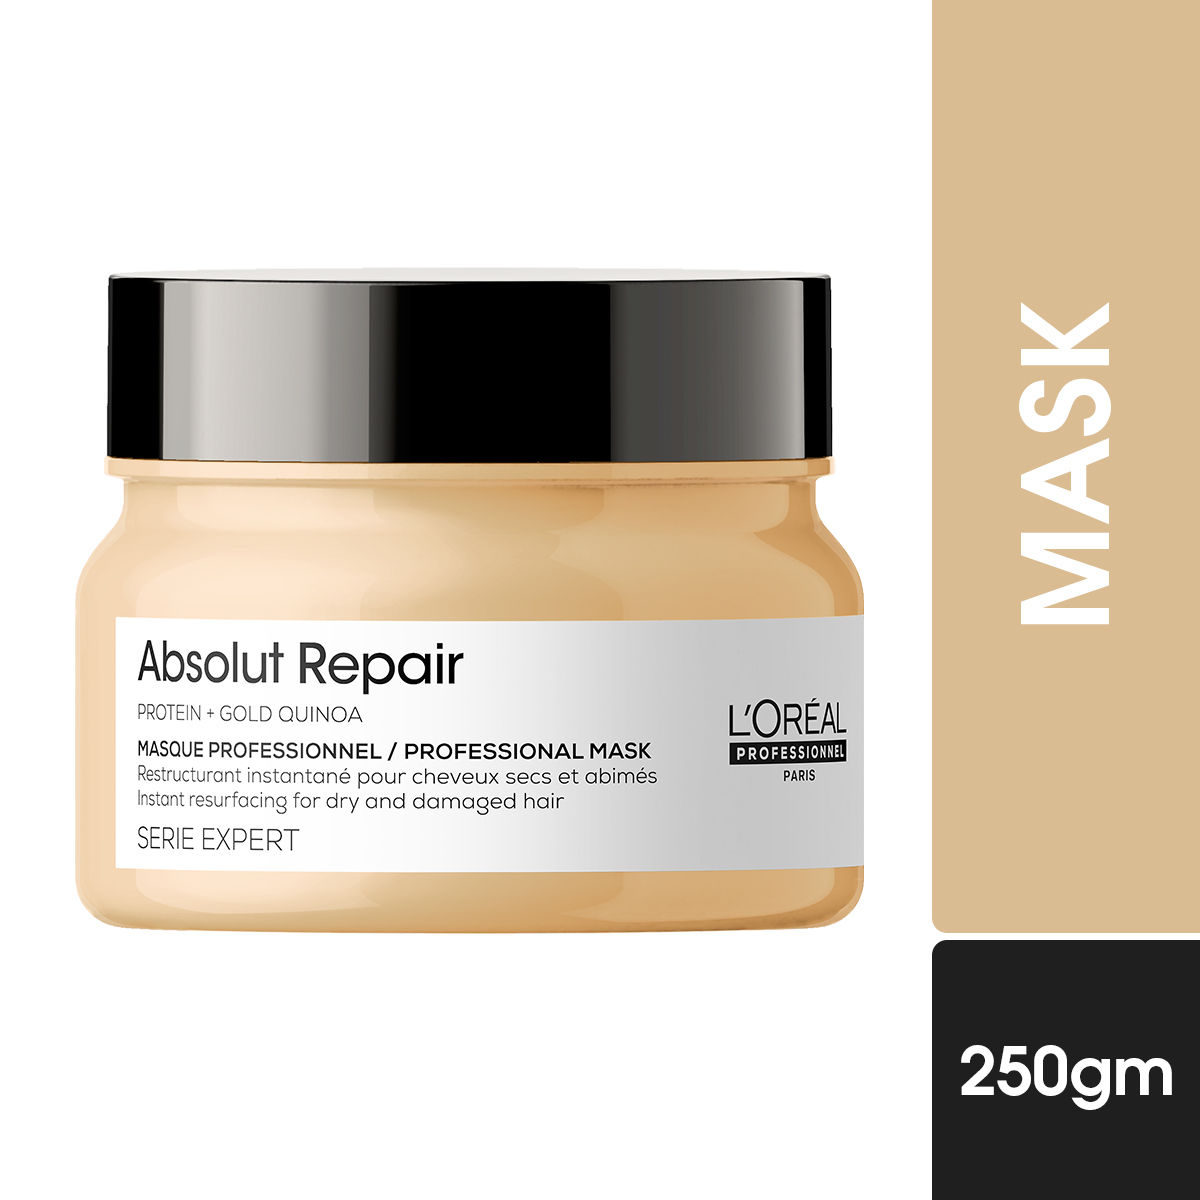 L'Oreal Professionnel Absolut Repair Hair Mask with Protein and Gold Quinoa, Serie Expert